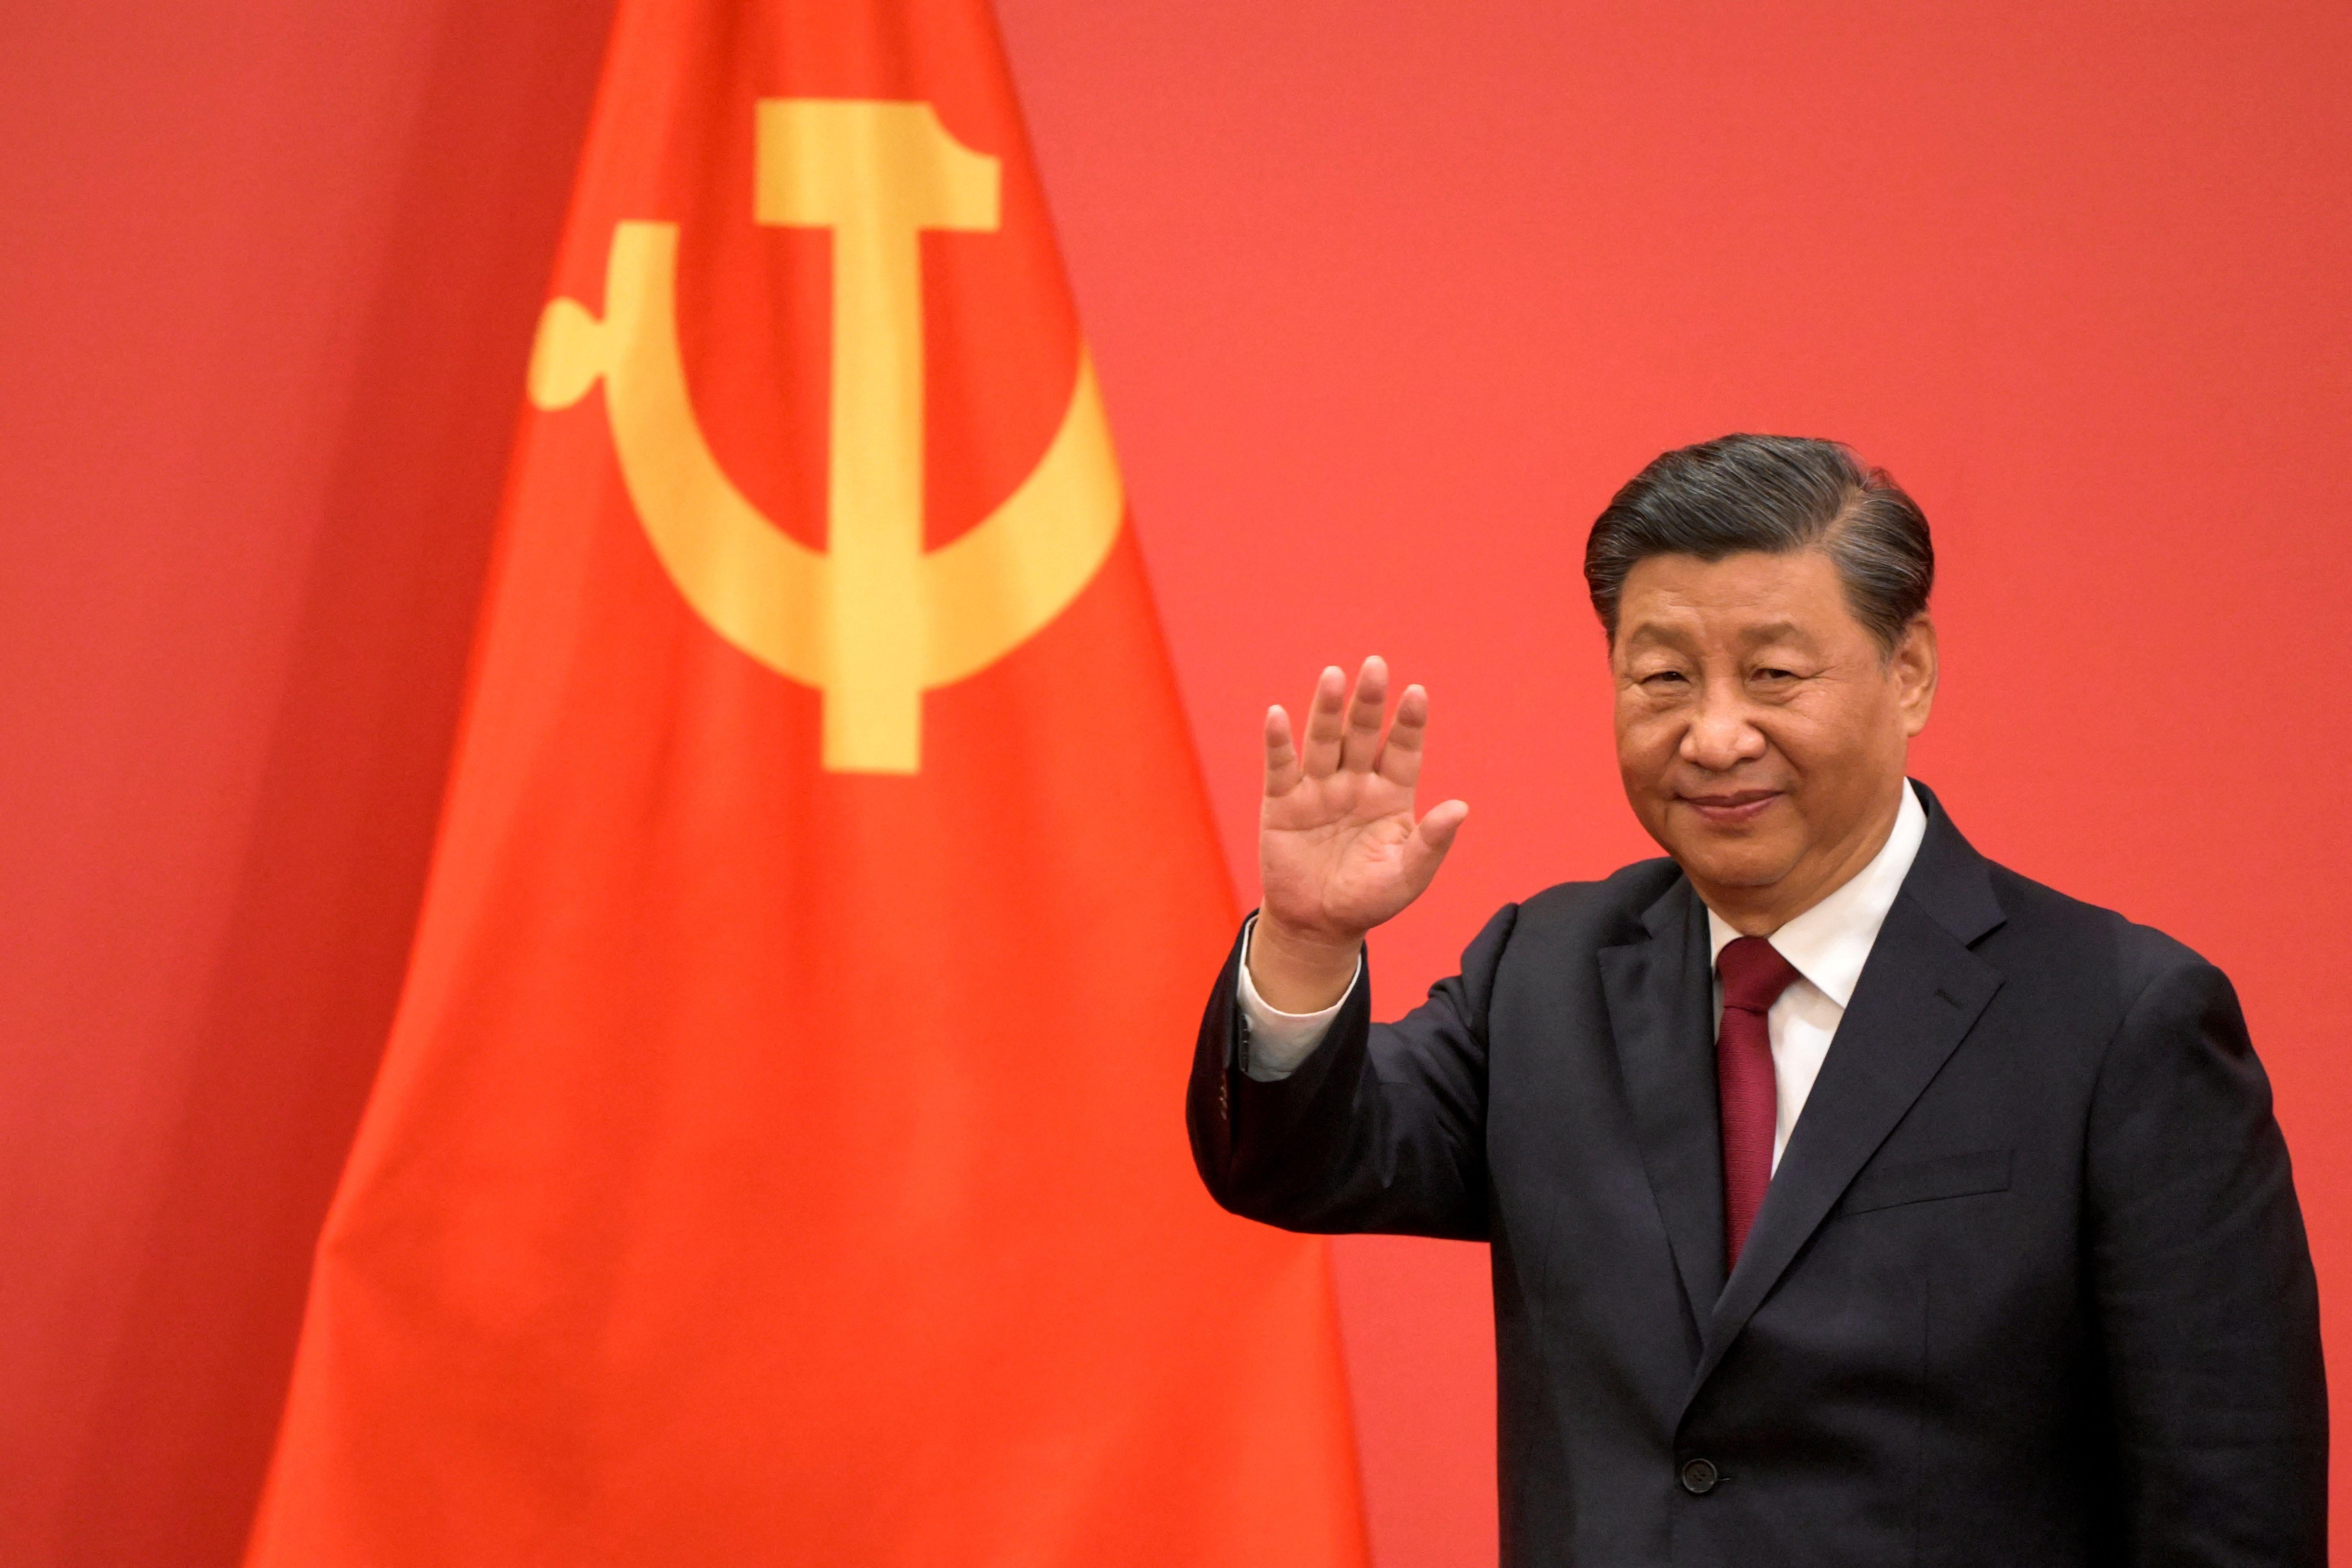 Xi Jinping waves in front of Chinese Communist Party flag.